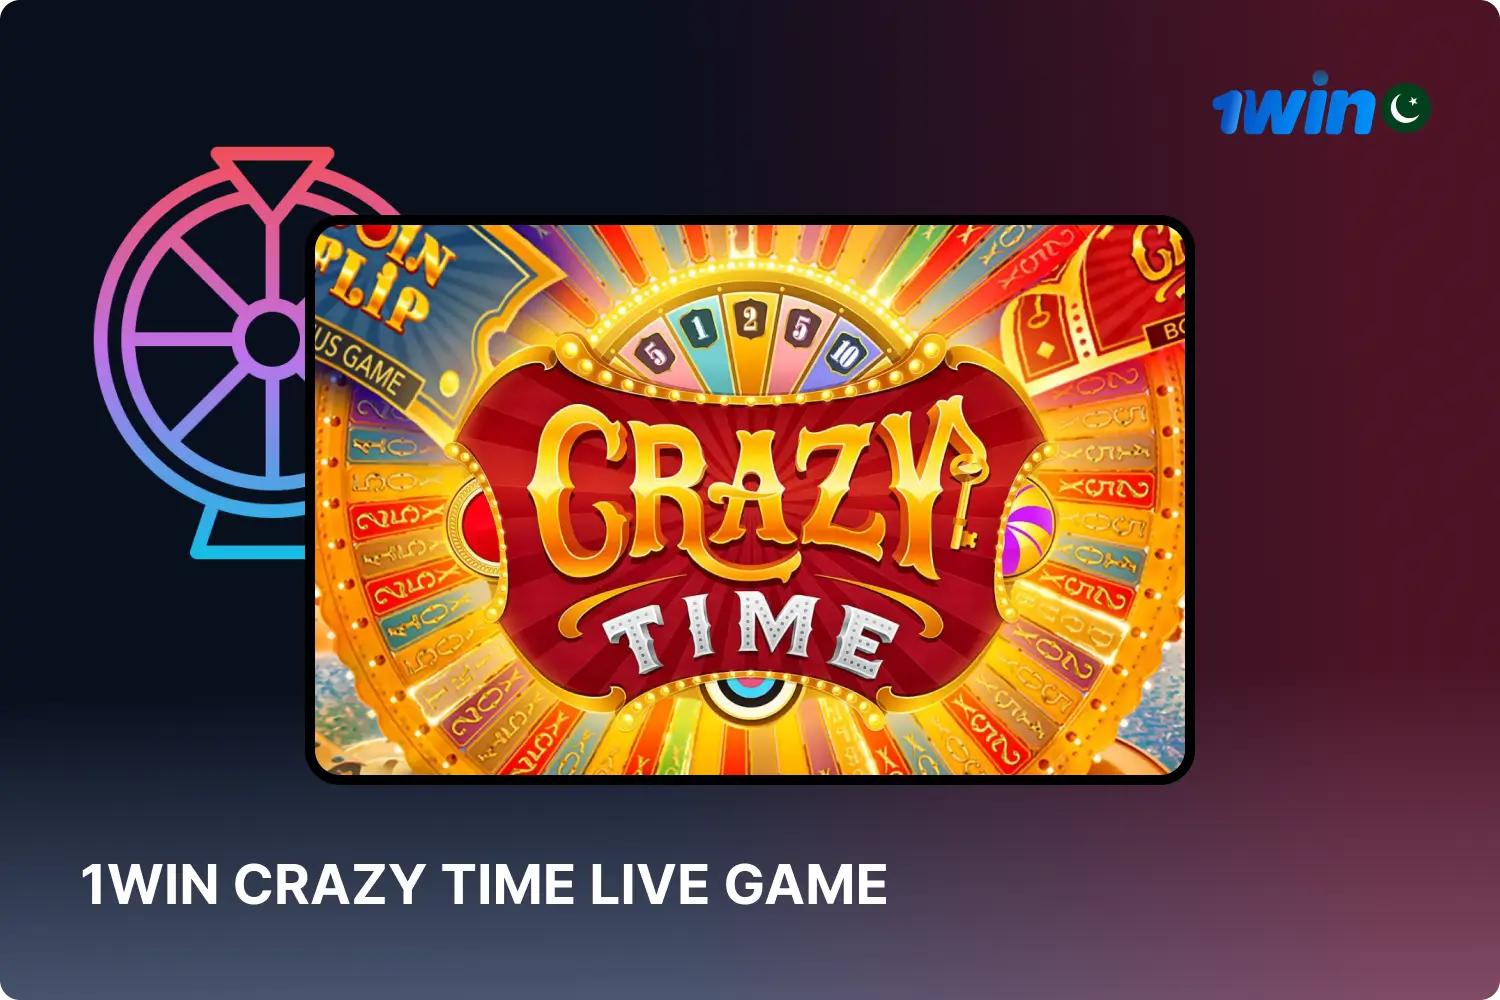 Gamblers from Pakistan can play the popular live dealer game show Crazy Time on the 1win's website and mobile app